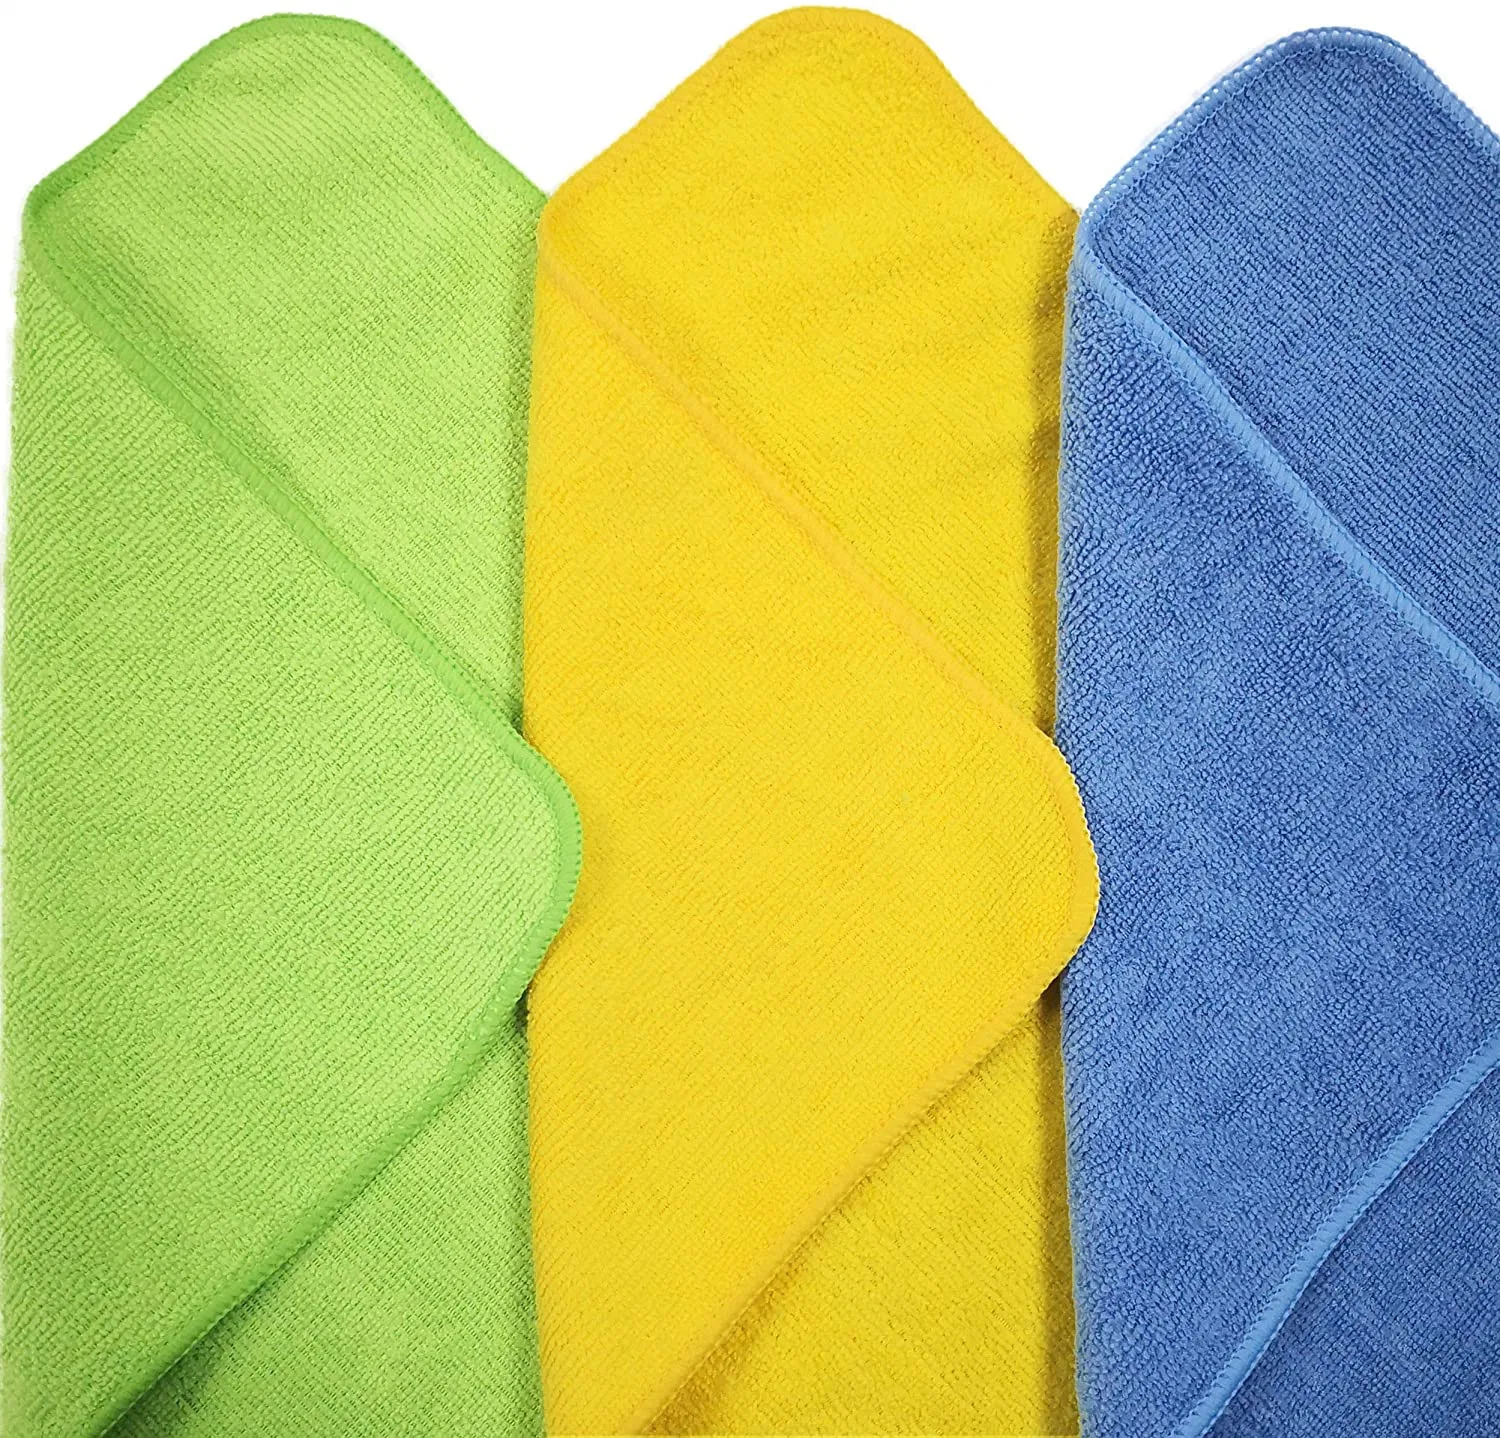 Super Soft Strong Water Absorbent Colorful Greey Yellow Grey Microfiber Terry Cleaning Cloth